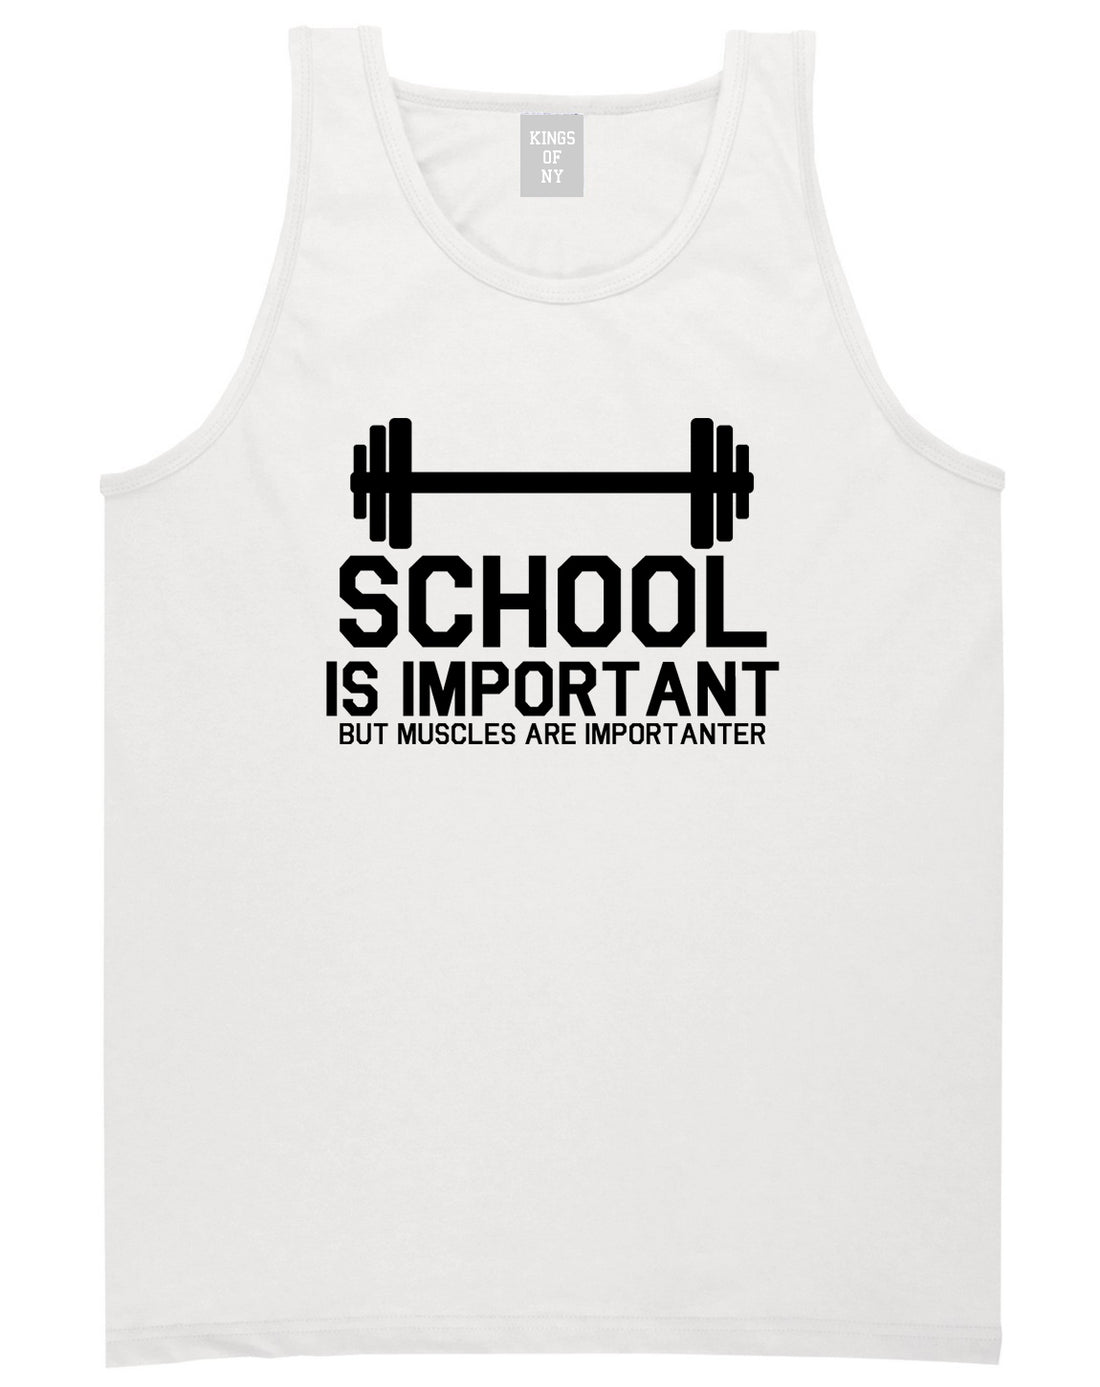 School Is Important But Muscles Are Importanter Funny Body Building Mens Tank Top T-Shirt White